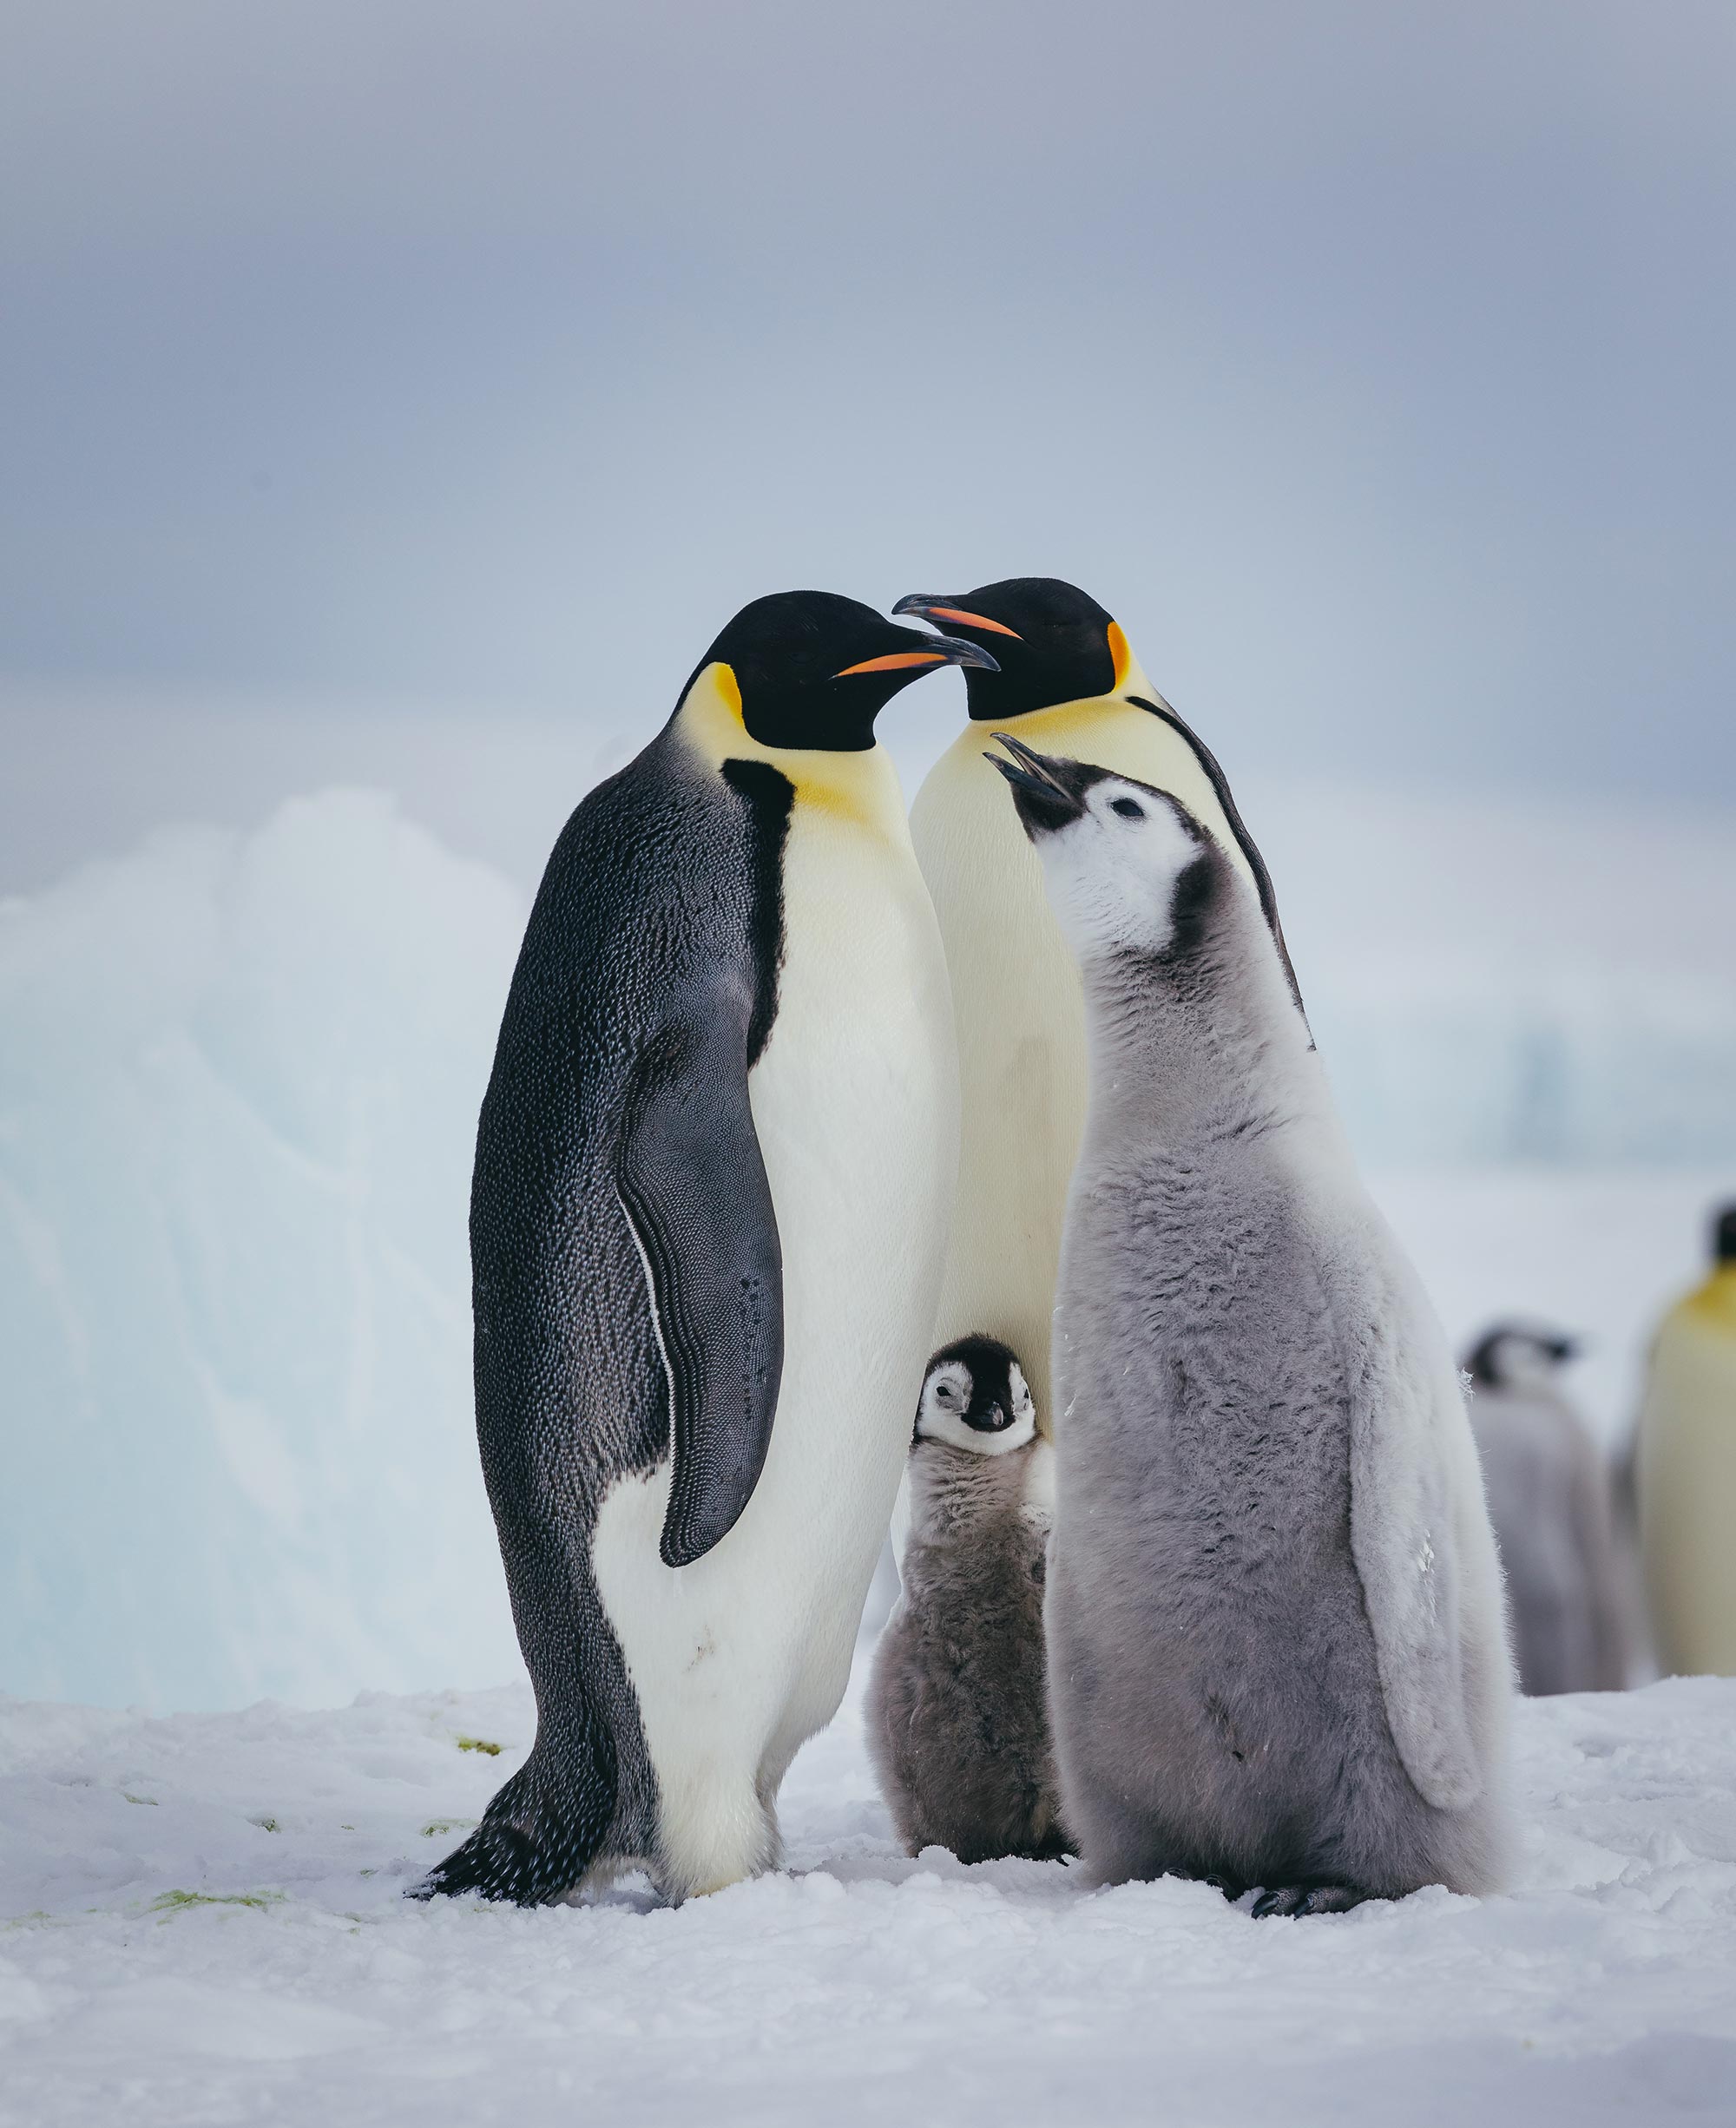 The opportunity to observe penguins in their natural habitat lures travelers to the Antarctic.